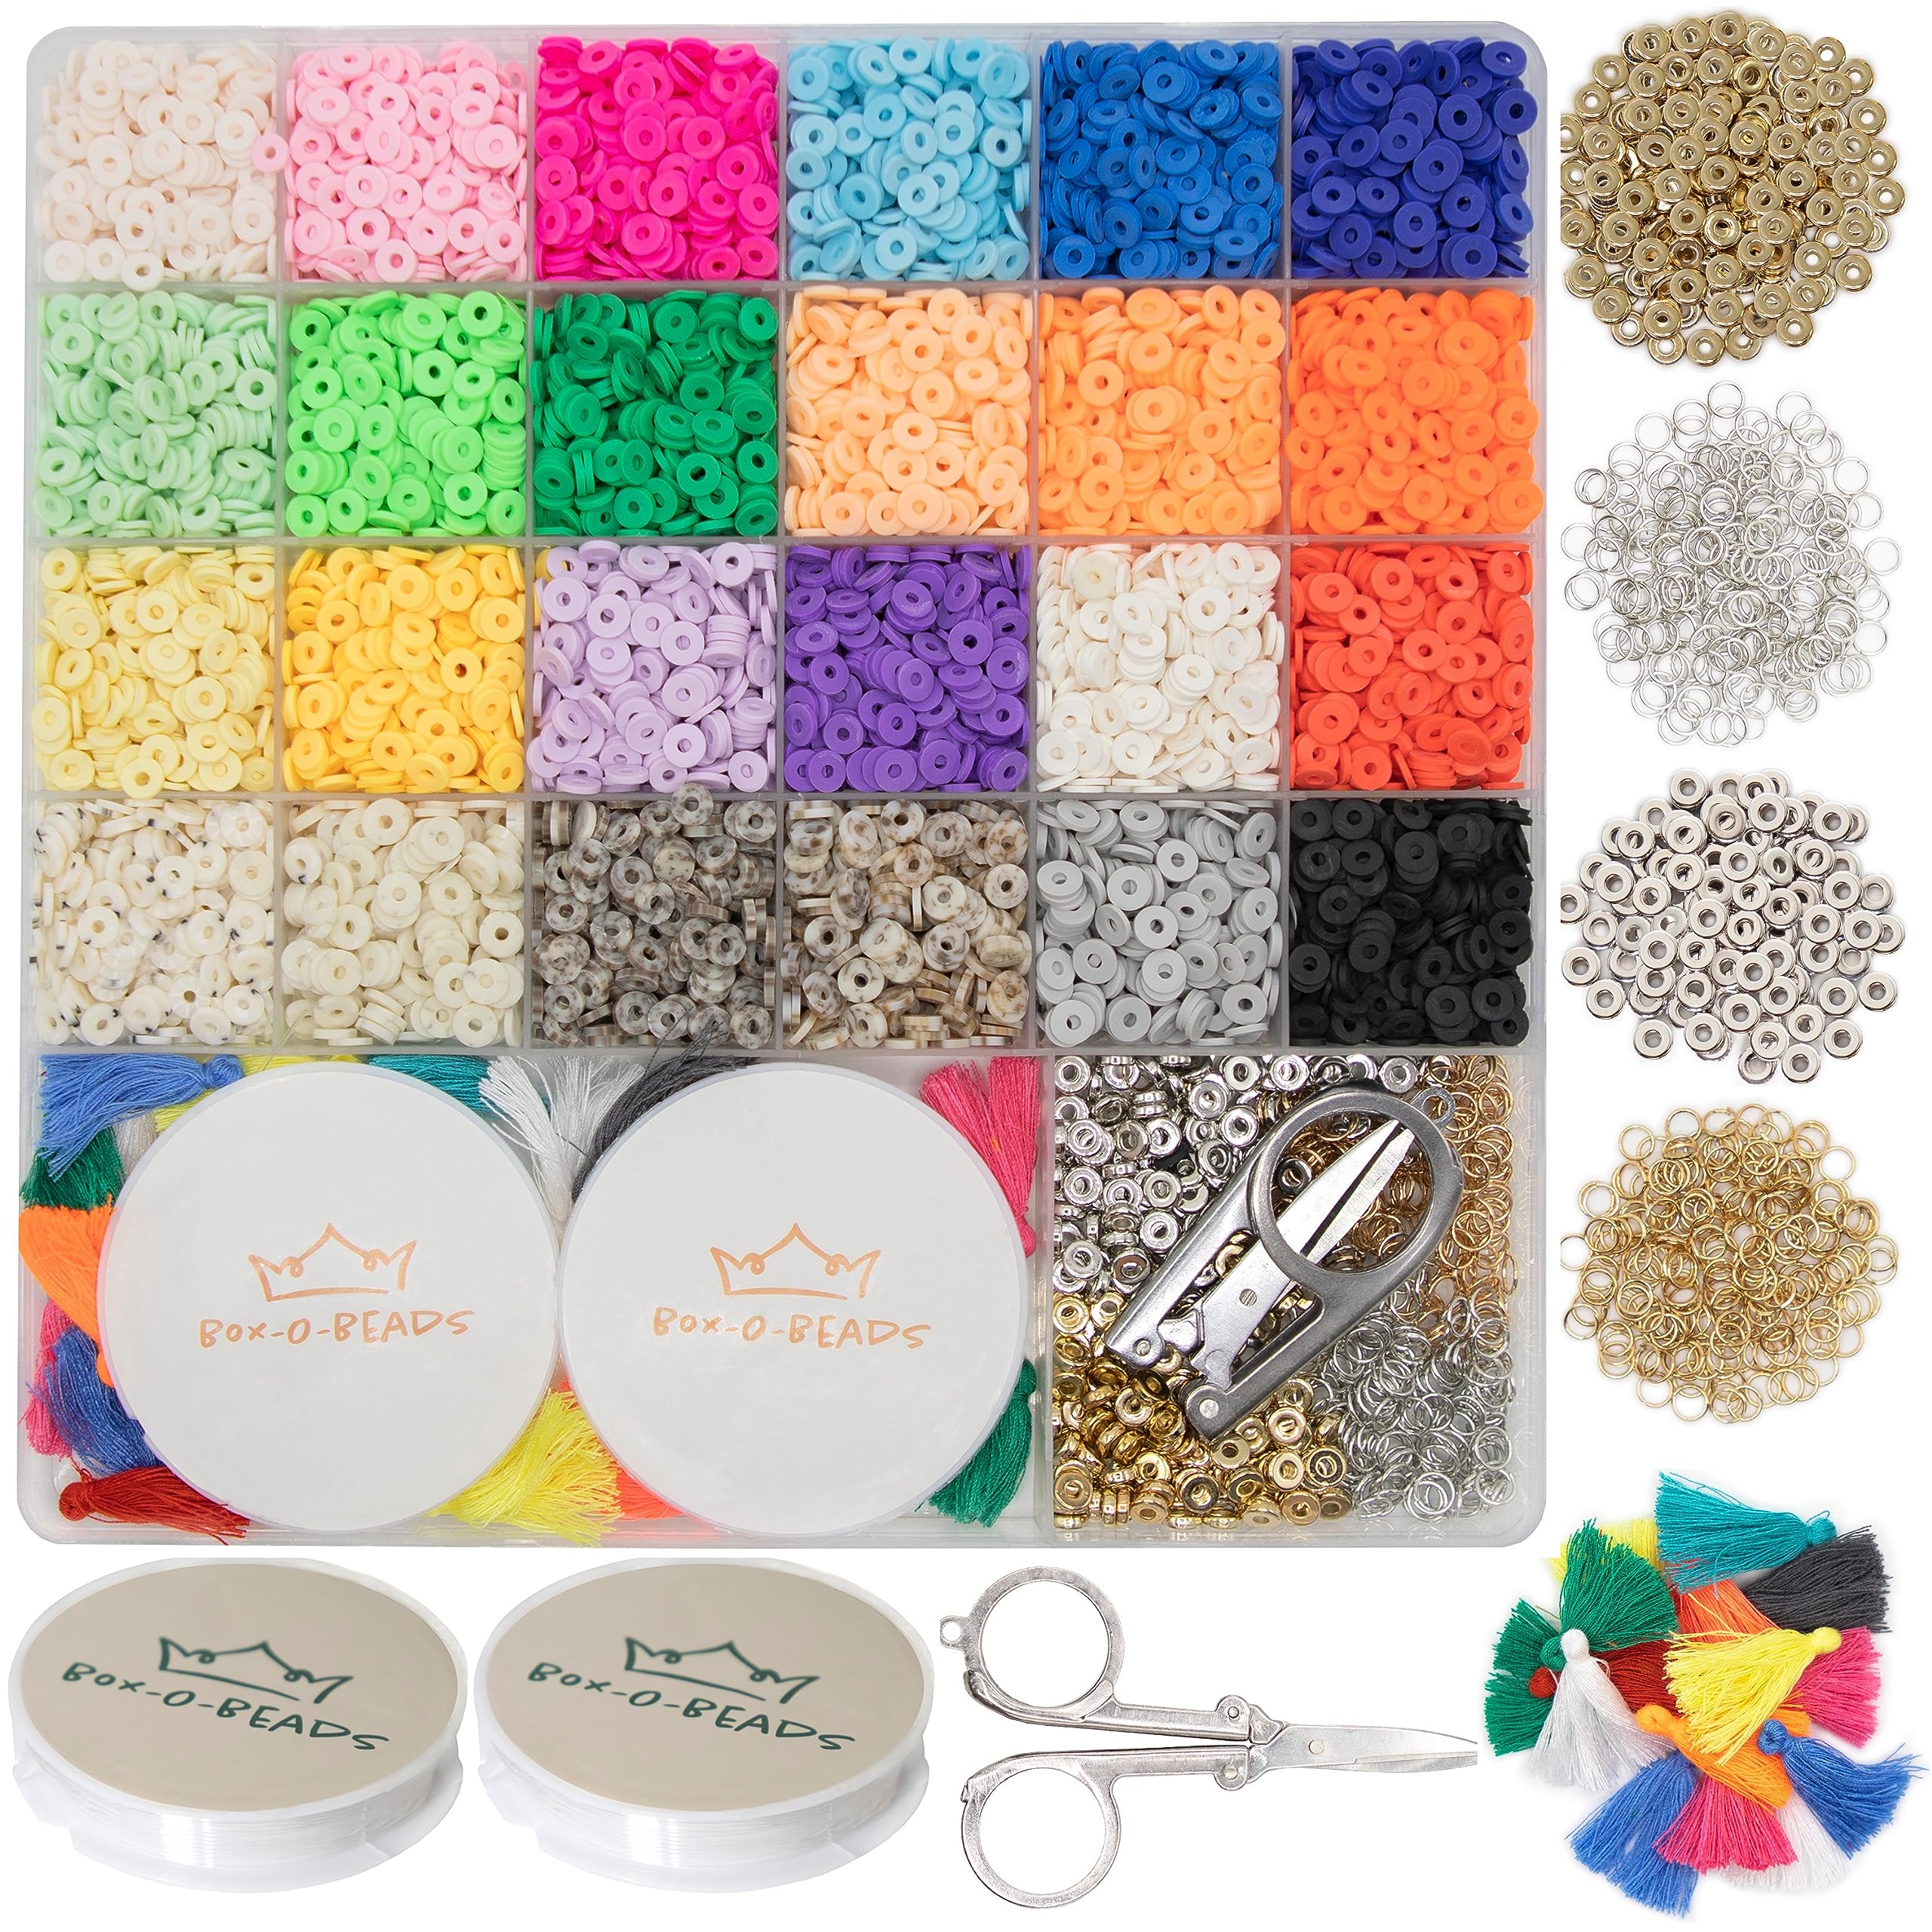 Felix LeChef Clay Beads Bracelet Making Kit by Box-O-Beads, 6000 Pcs Polymer Clay Heishi Beads for Bracelet & Jewelry Making, DIY Bracelet Ma